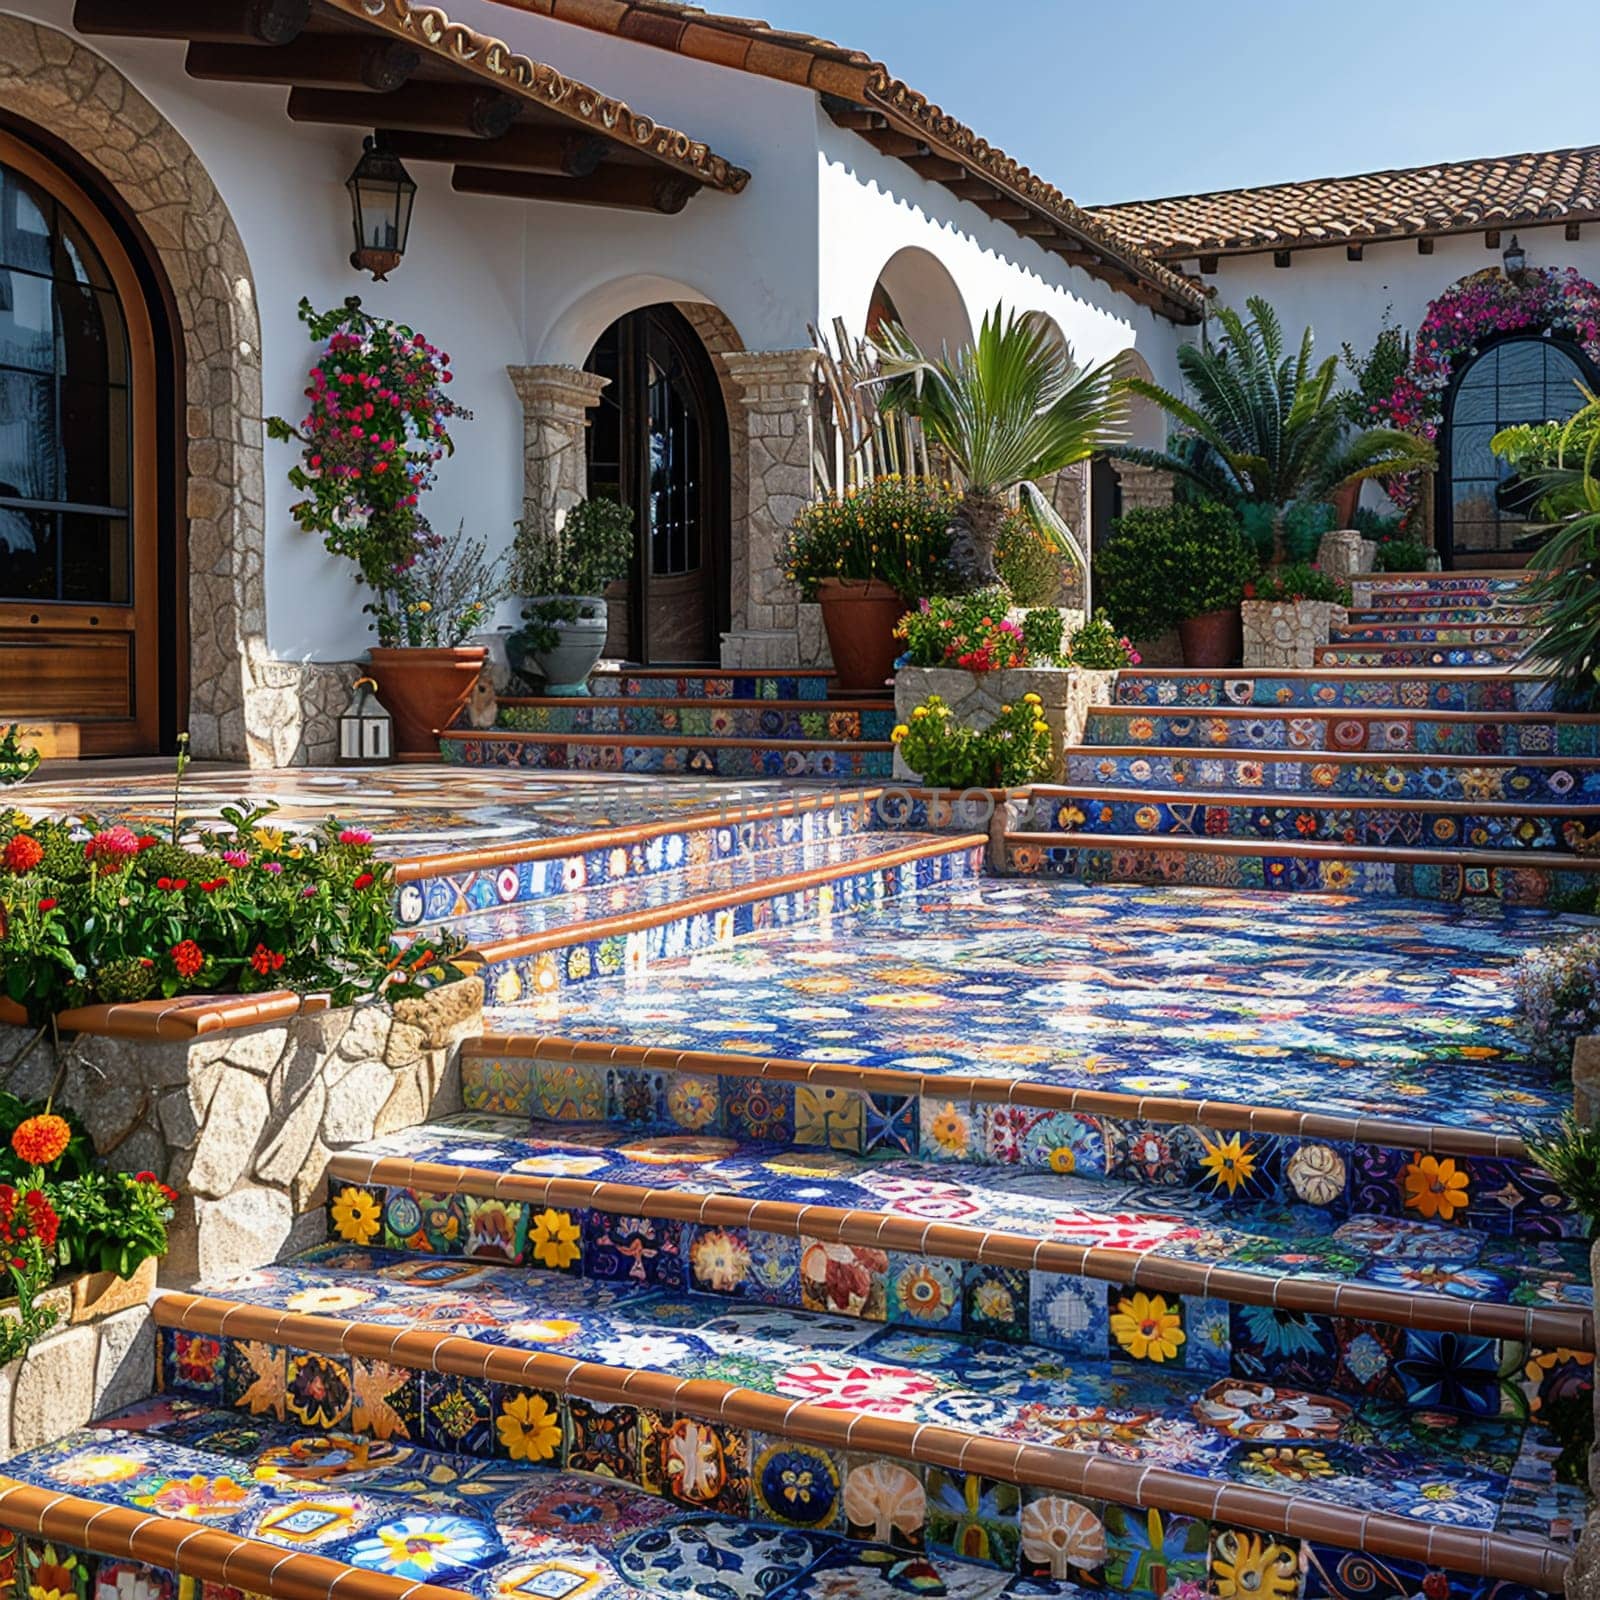 Tiled Mosaic Podium in a Mediterranean Courtyard, The colorful tiles blur with the sunny ambiance, perfect for vibrant and exotic product lines.